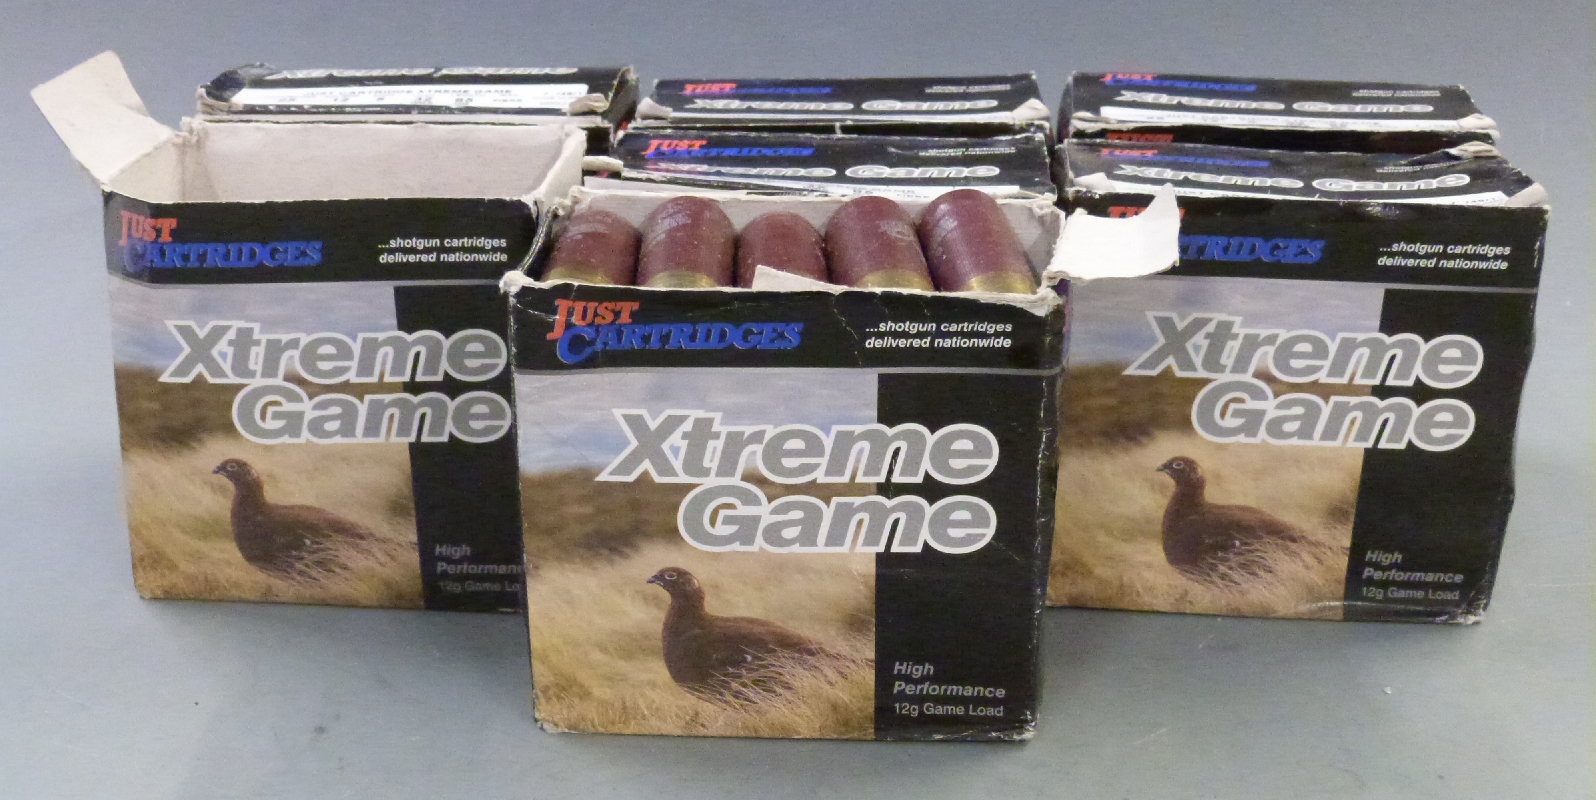 One-hundred-and-sixty-four Xtreme Game 12 bore shotgun cartridges, in original boxes. PLEASE NOTE